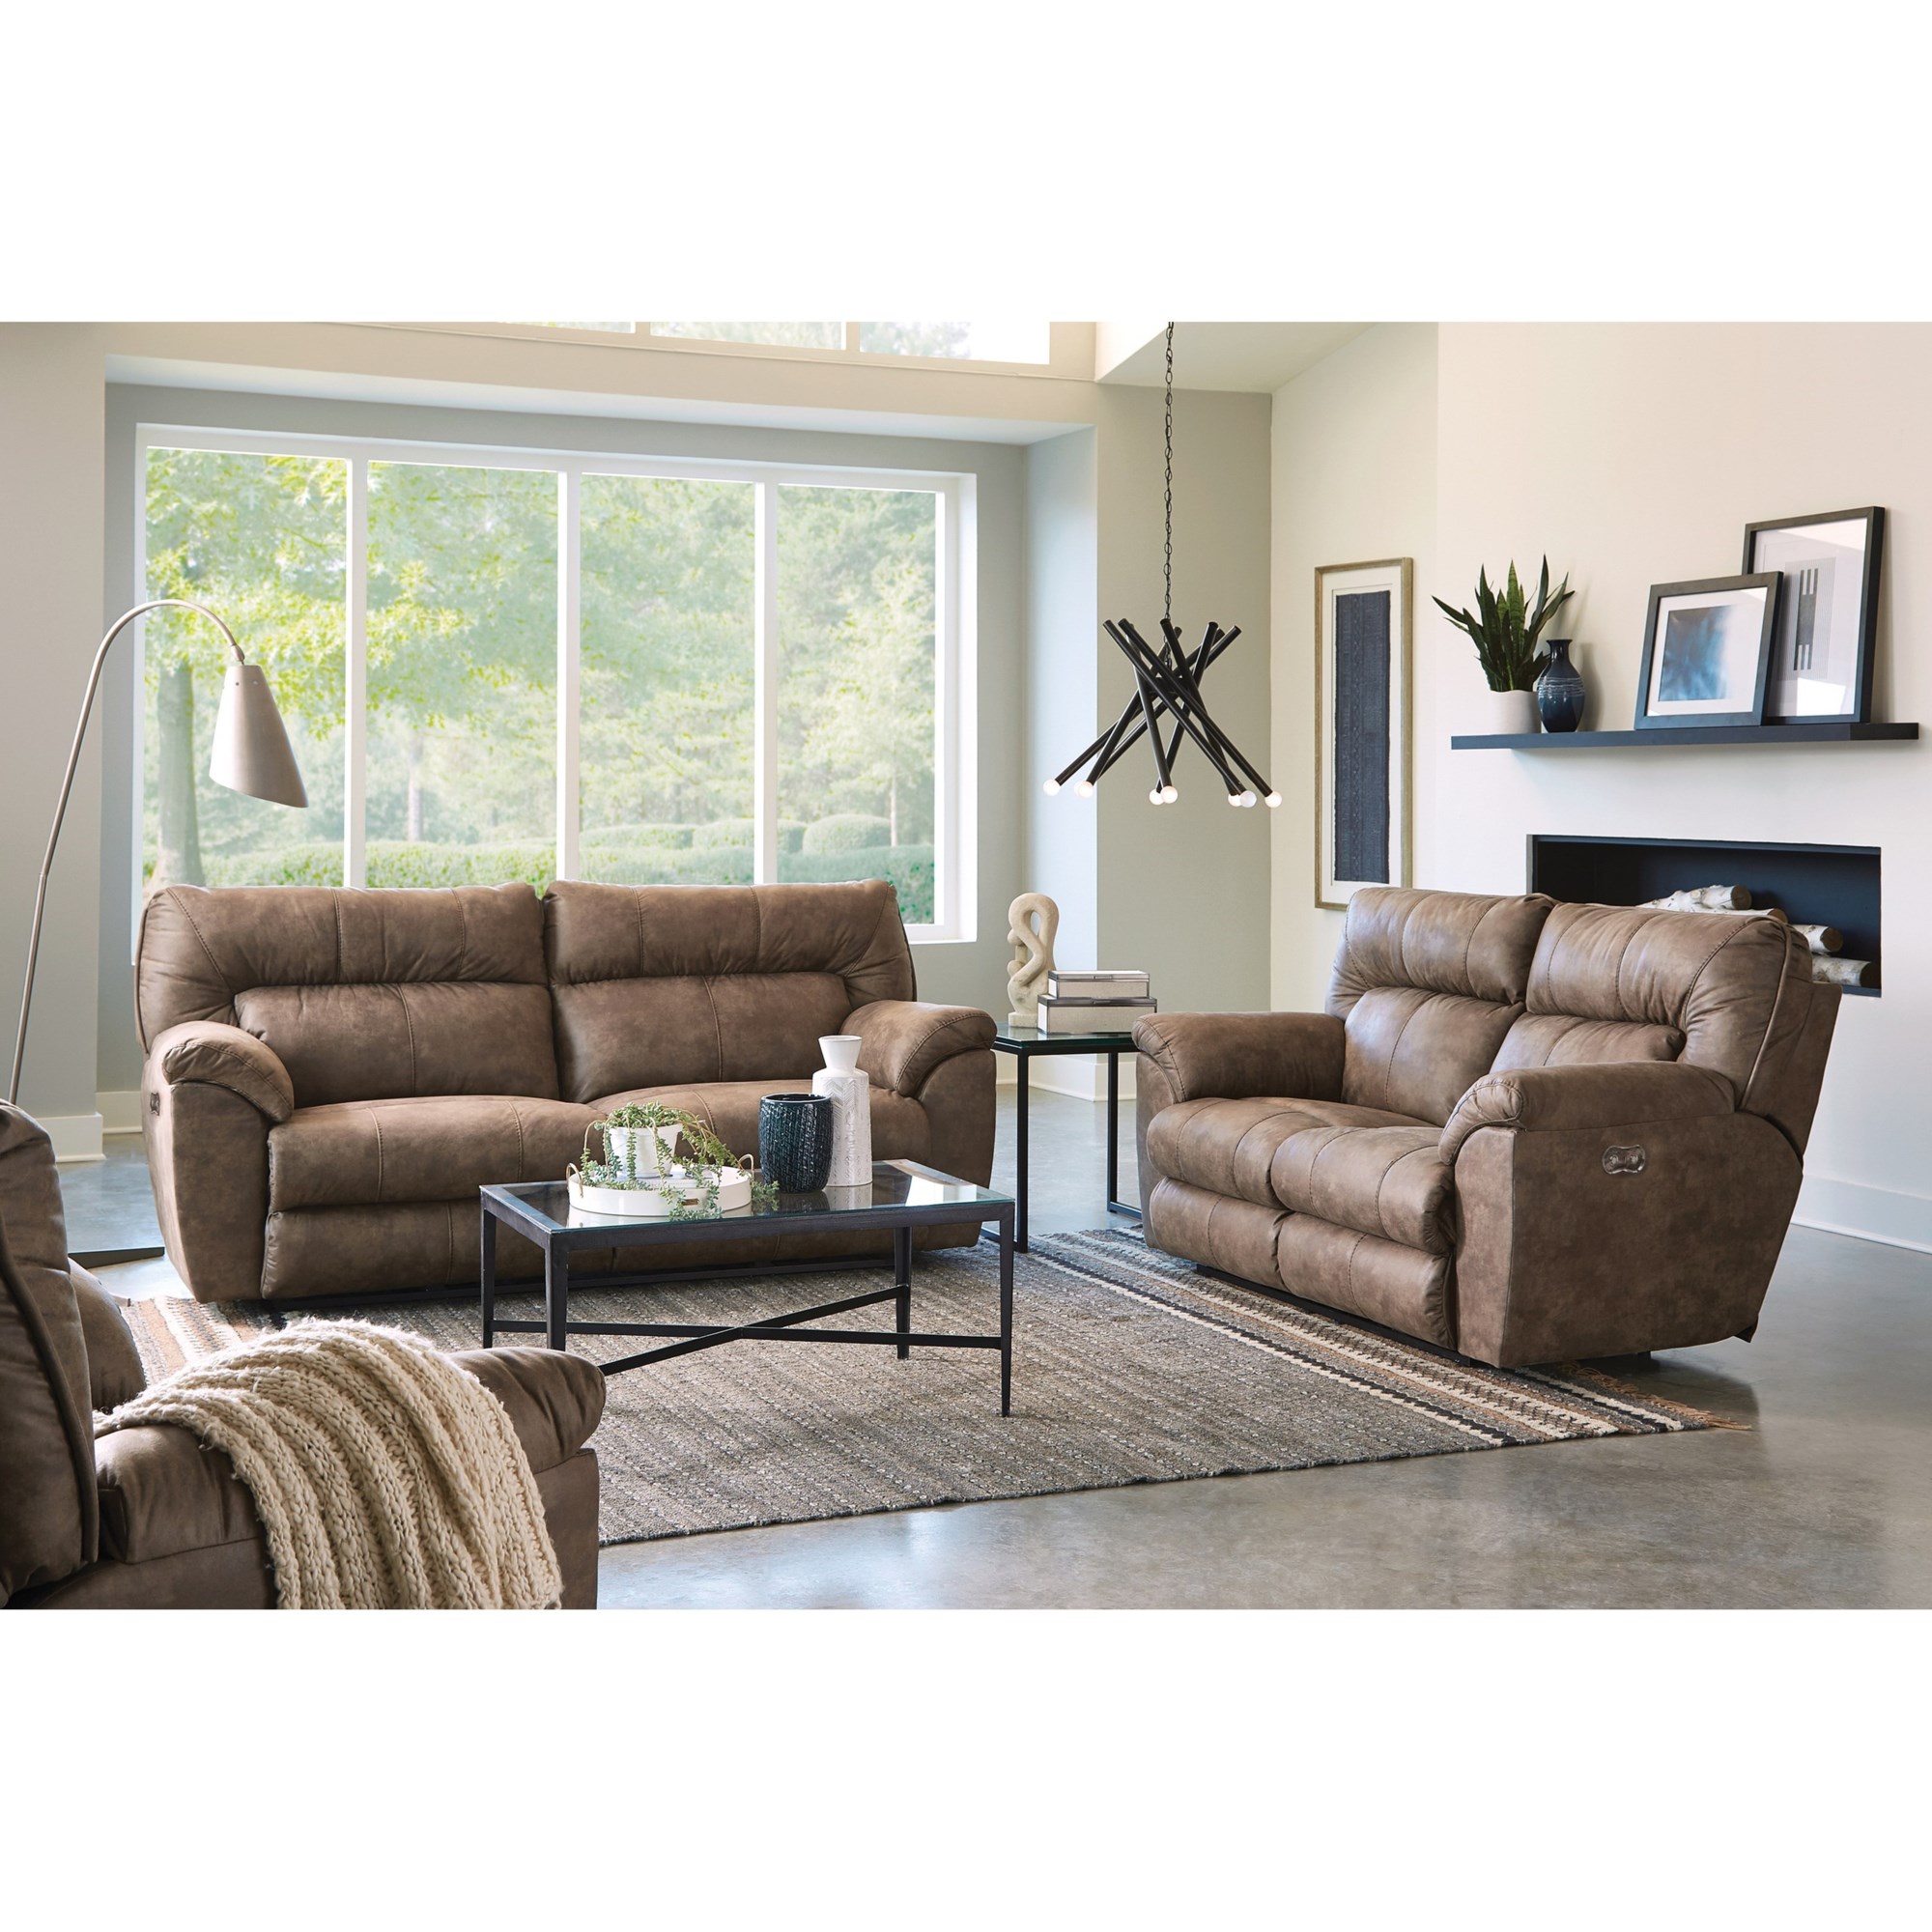 Catnapper Hollins DE295 Casual Contemporary Power Reclining Sofa with USB  Ports, Standard Furniture